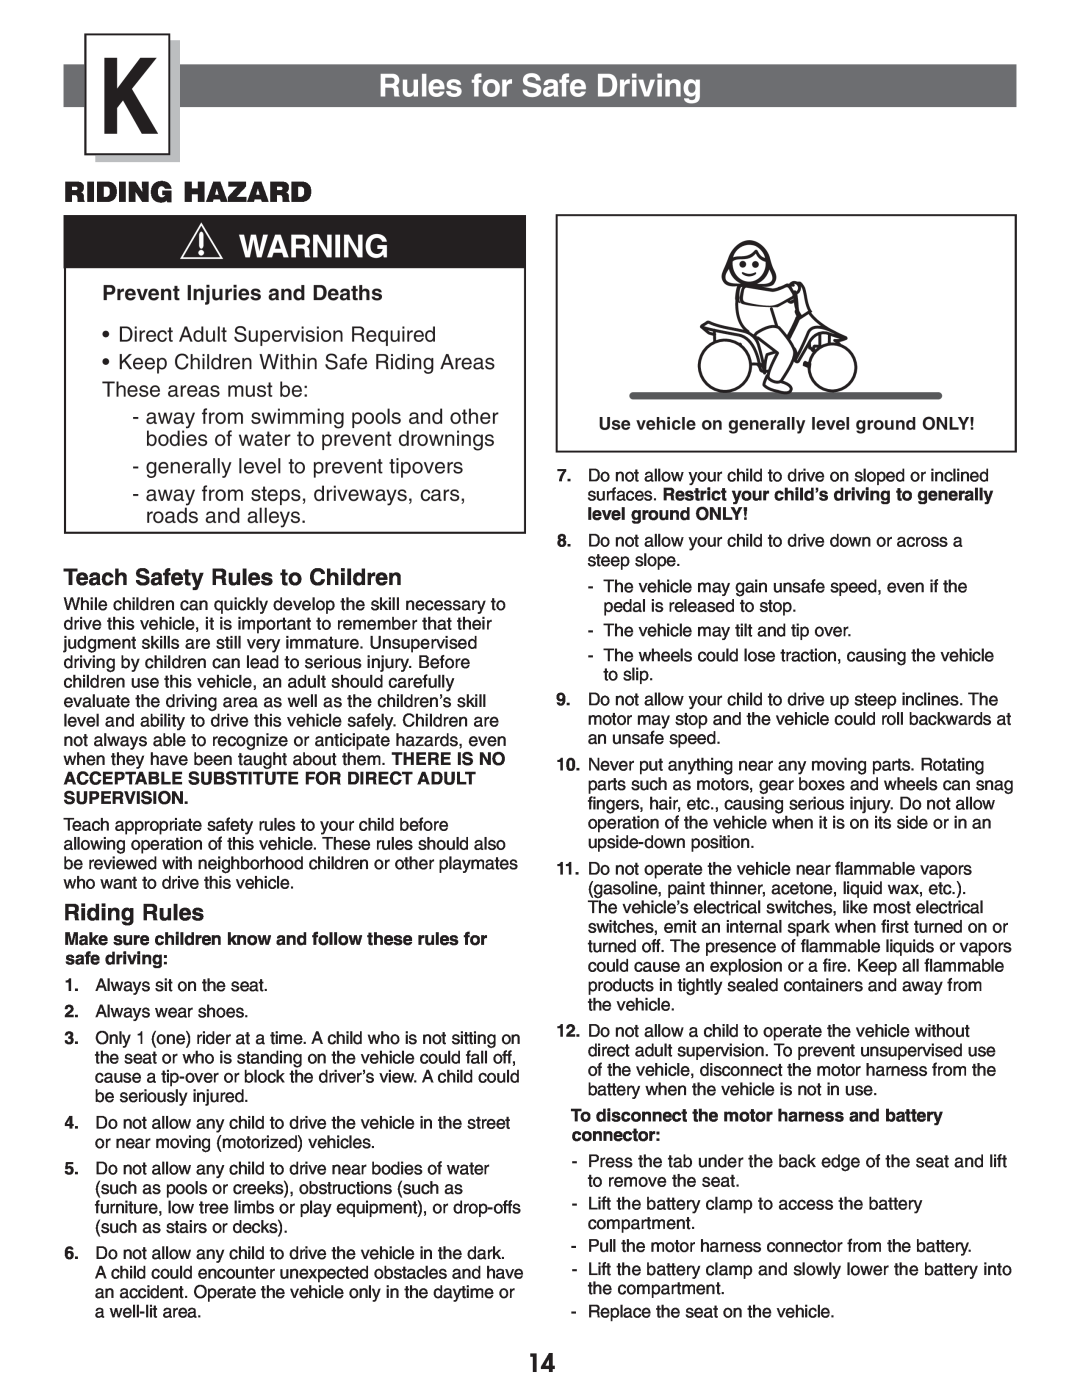 Kawasaki B9272 owner manual Rules for Safe Driving, Riding Hazard, Teach Safety Rules to Children, Riding Rules 